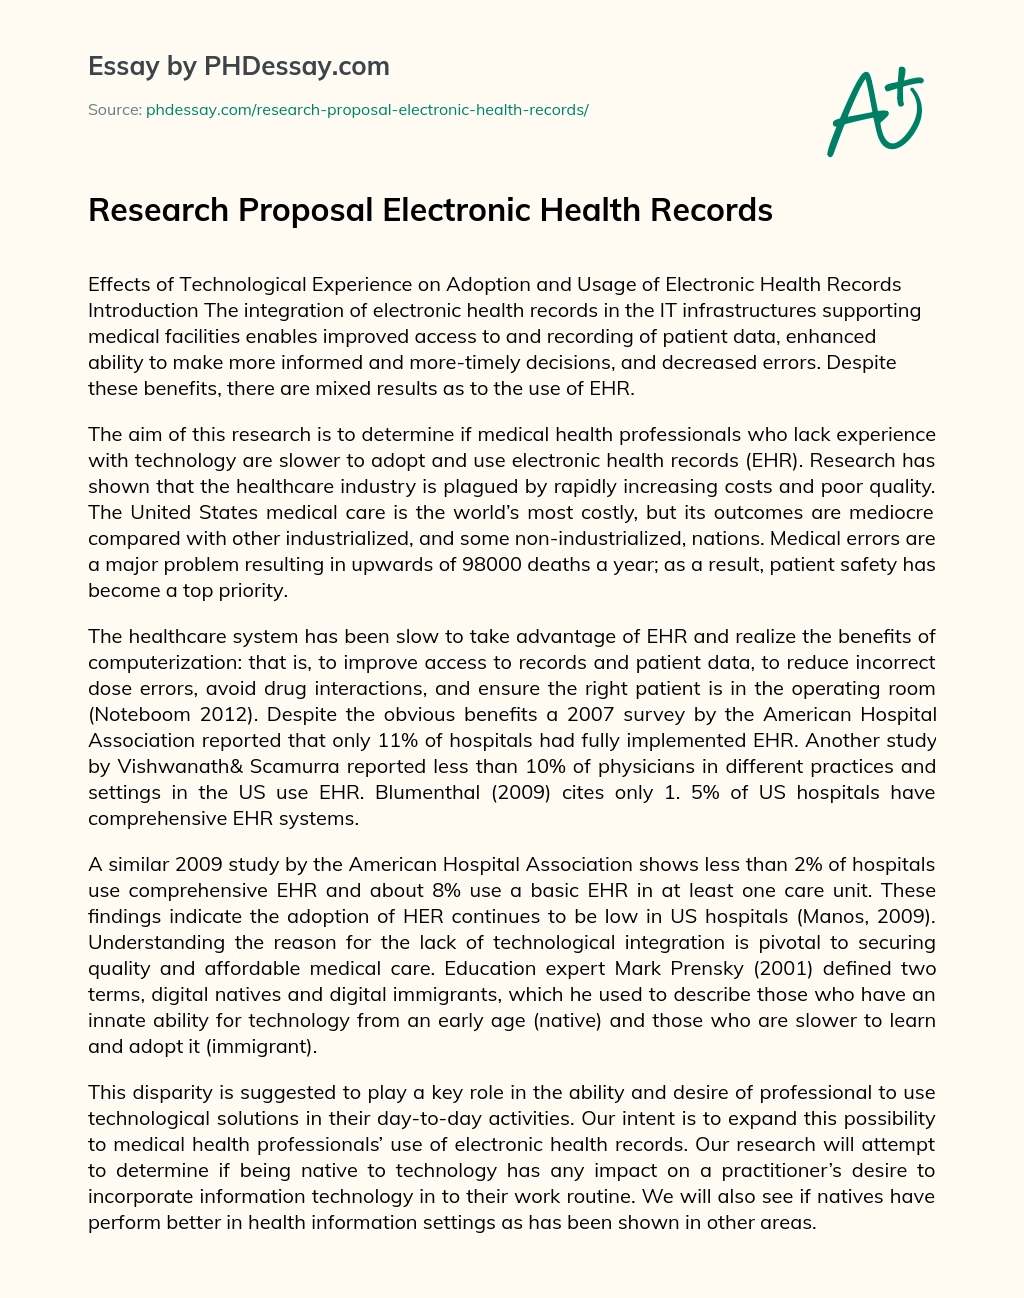 Research Proposal Electronic Health Records essay